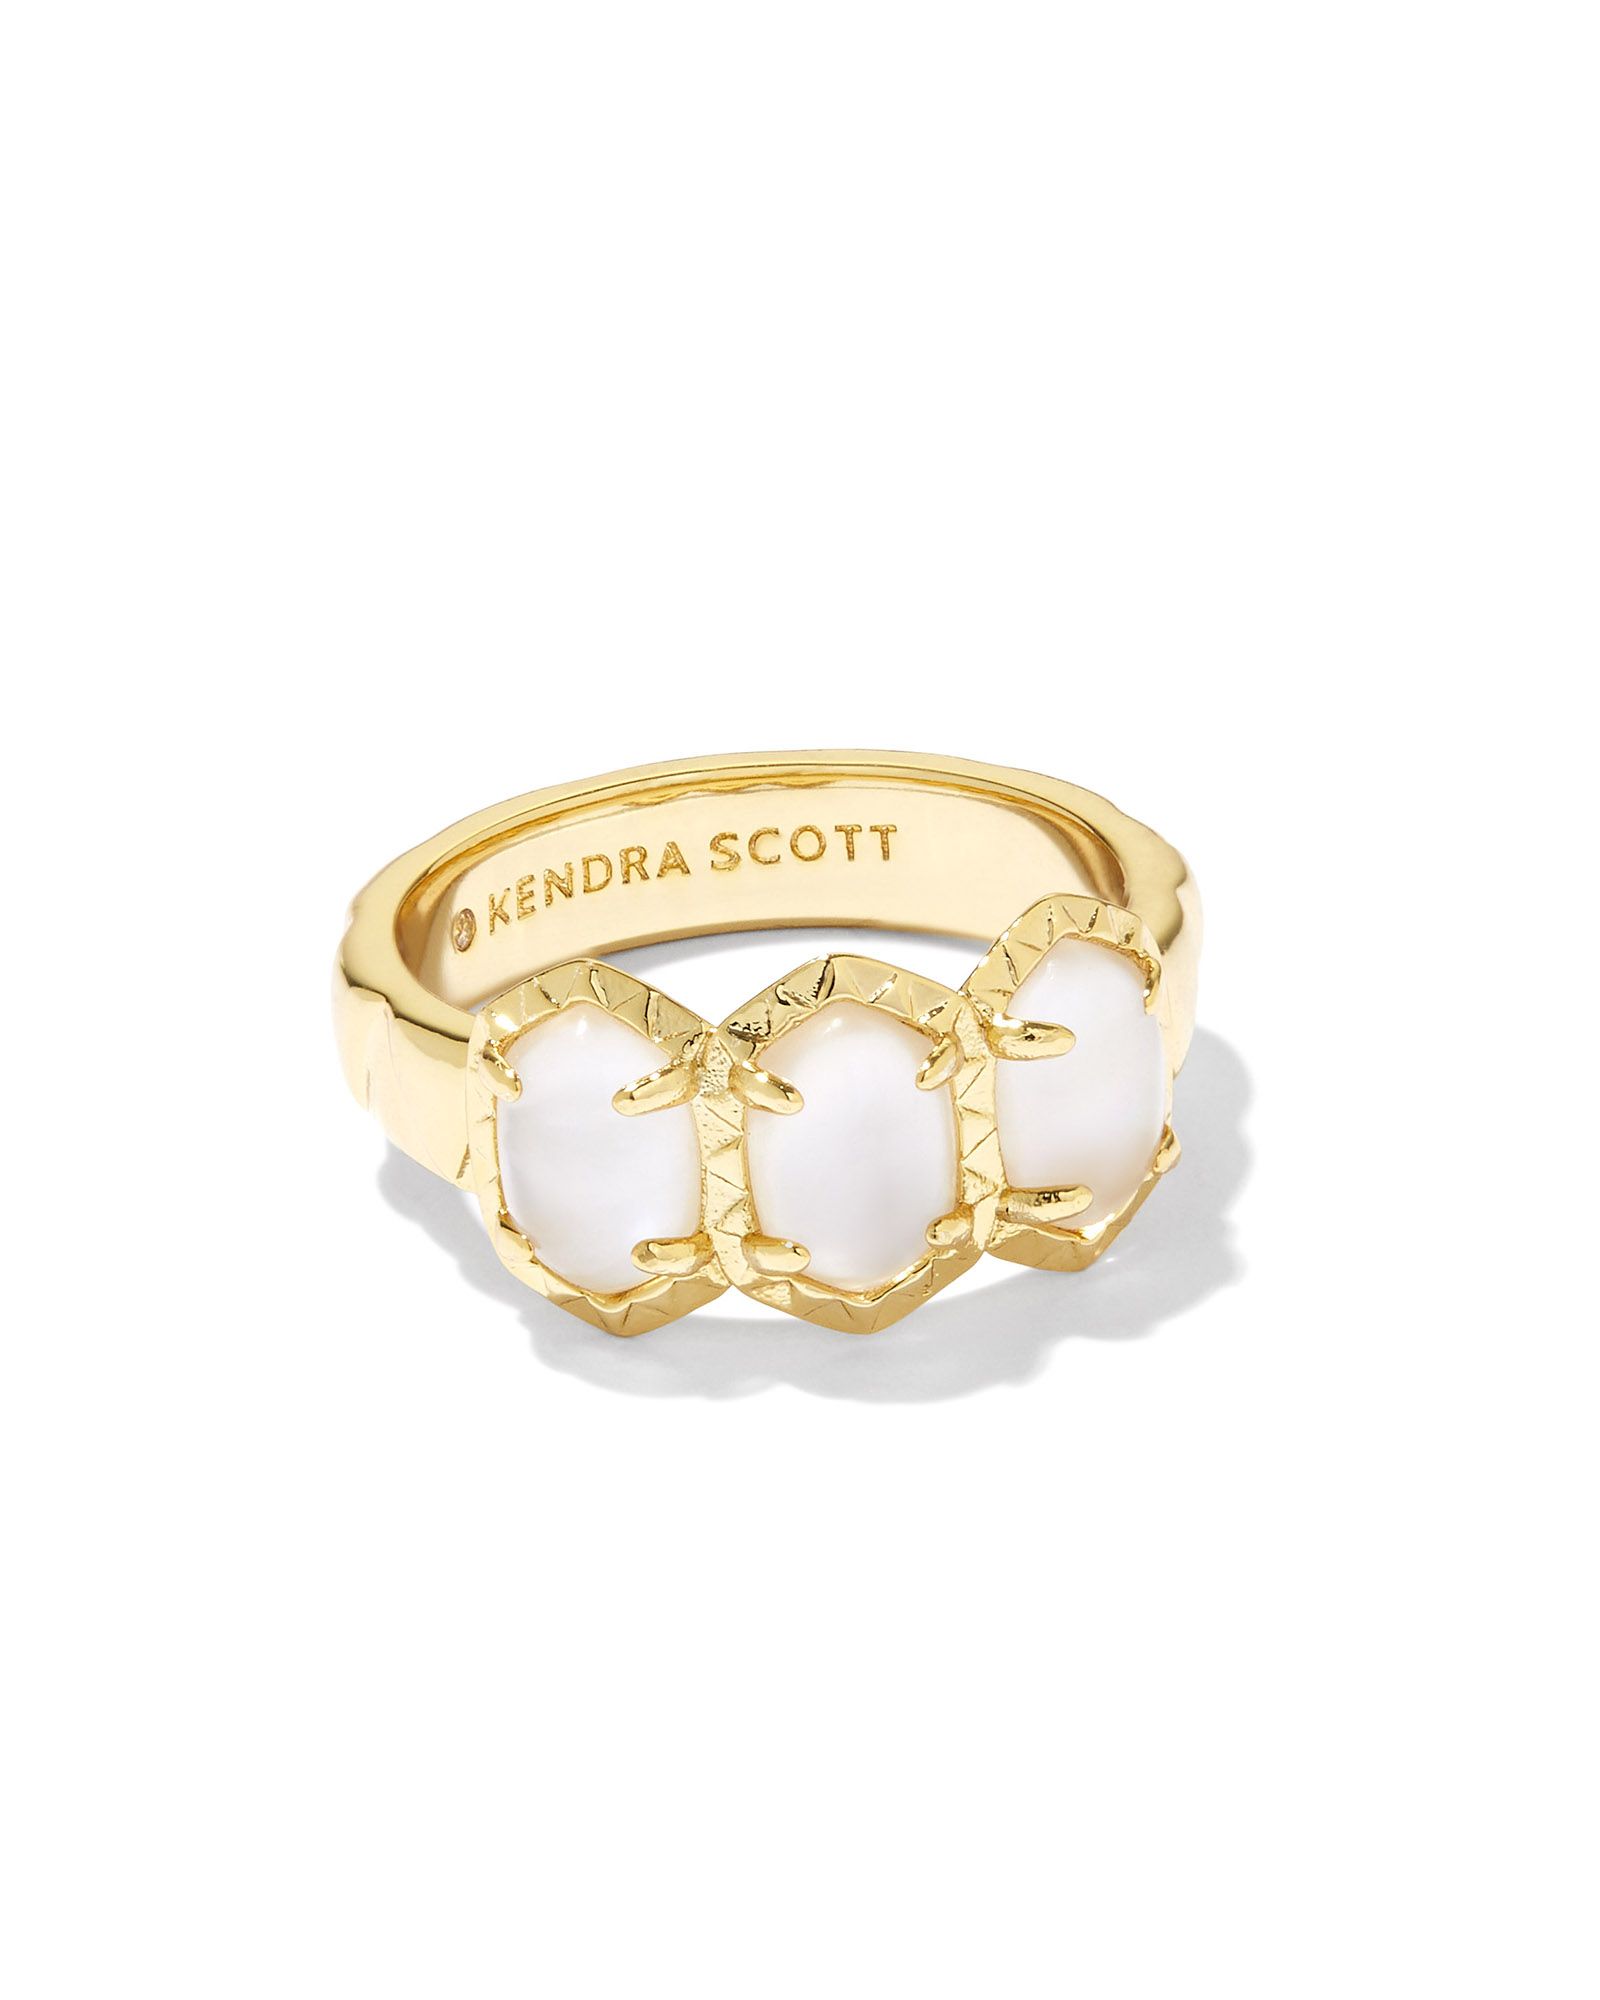 Daphne Gold Band Ring in Ivory Mother-of-Pearl | Kendra Scott